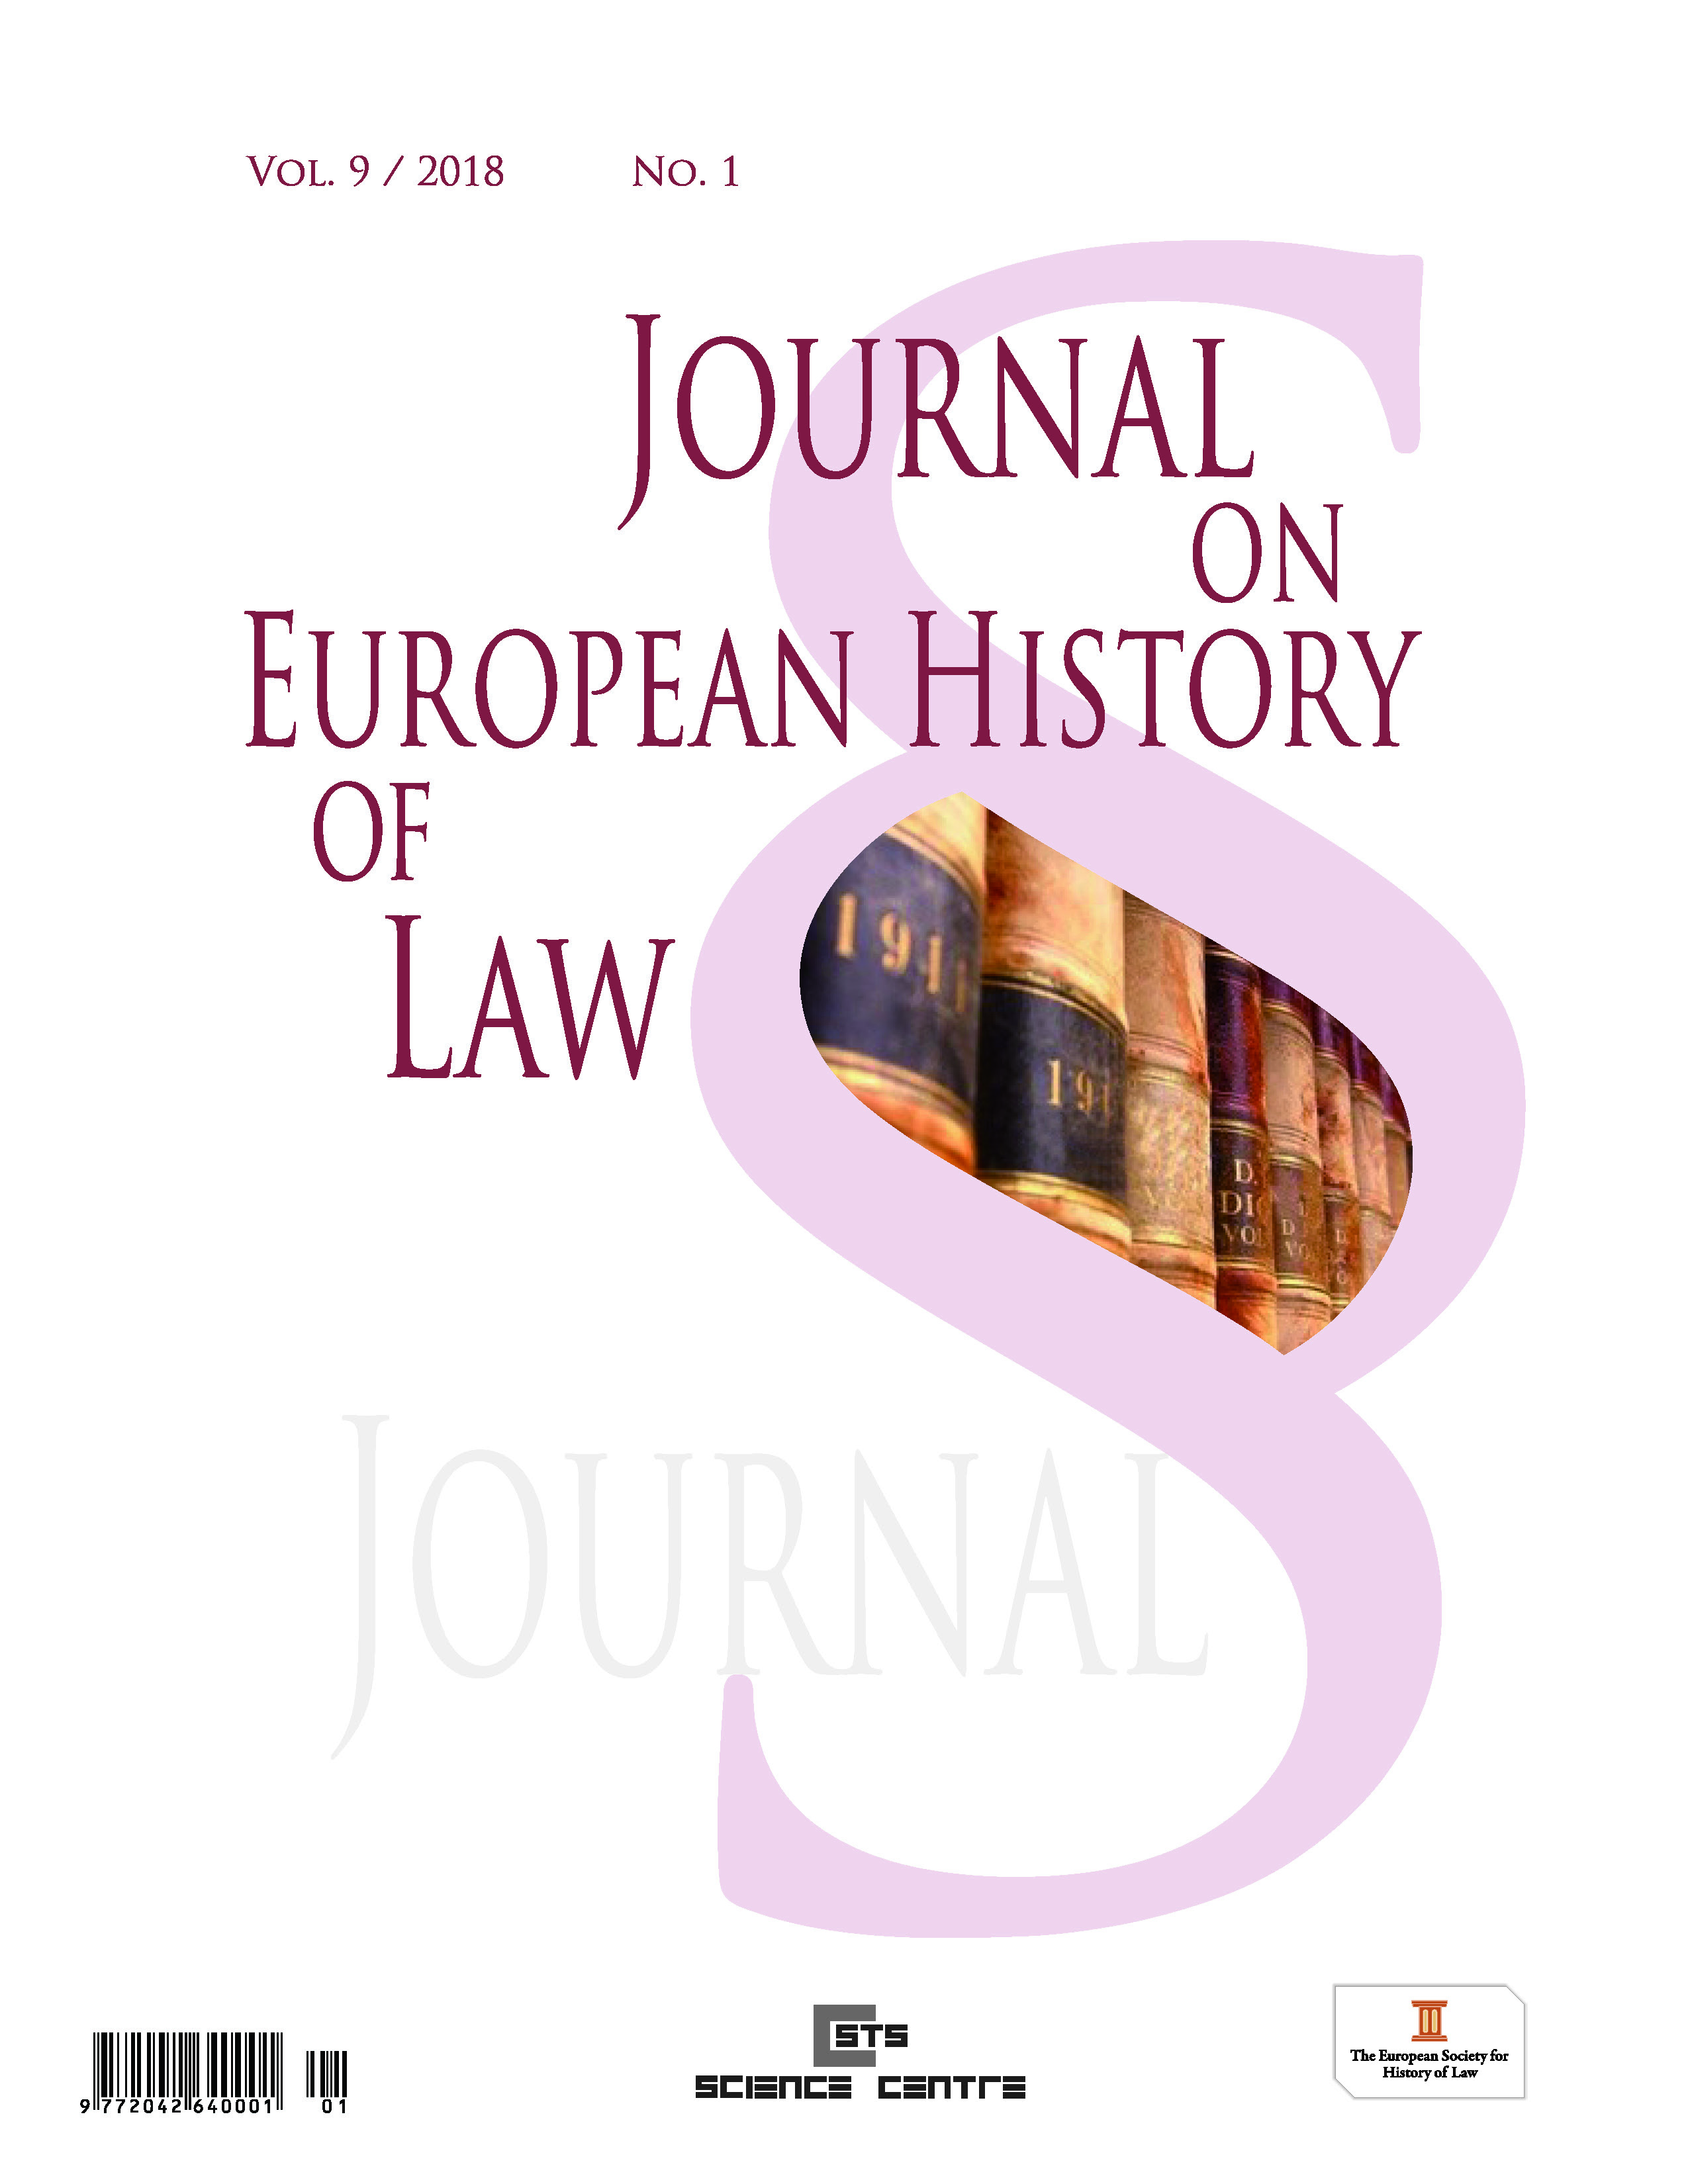 The Development of the German Criminal Law of Evidence between 1750 and 1870: from the System of Legal Proofs to the freie beweiswürdigung – Part 1